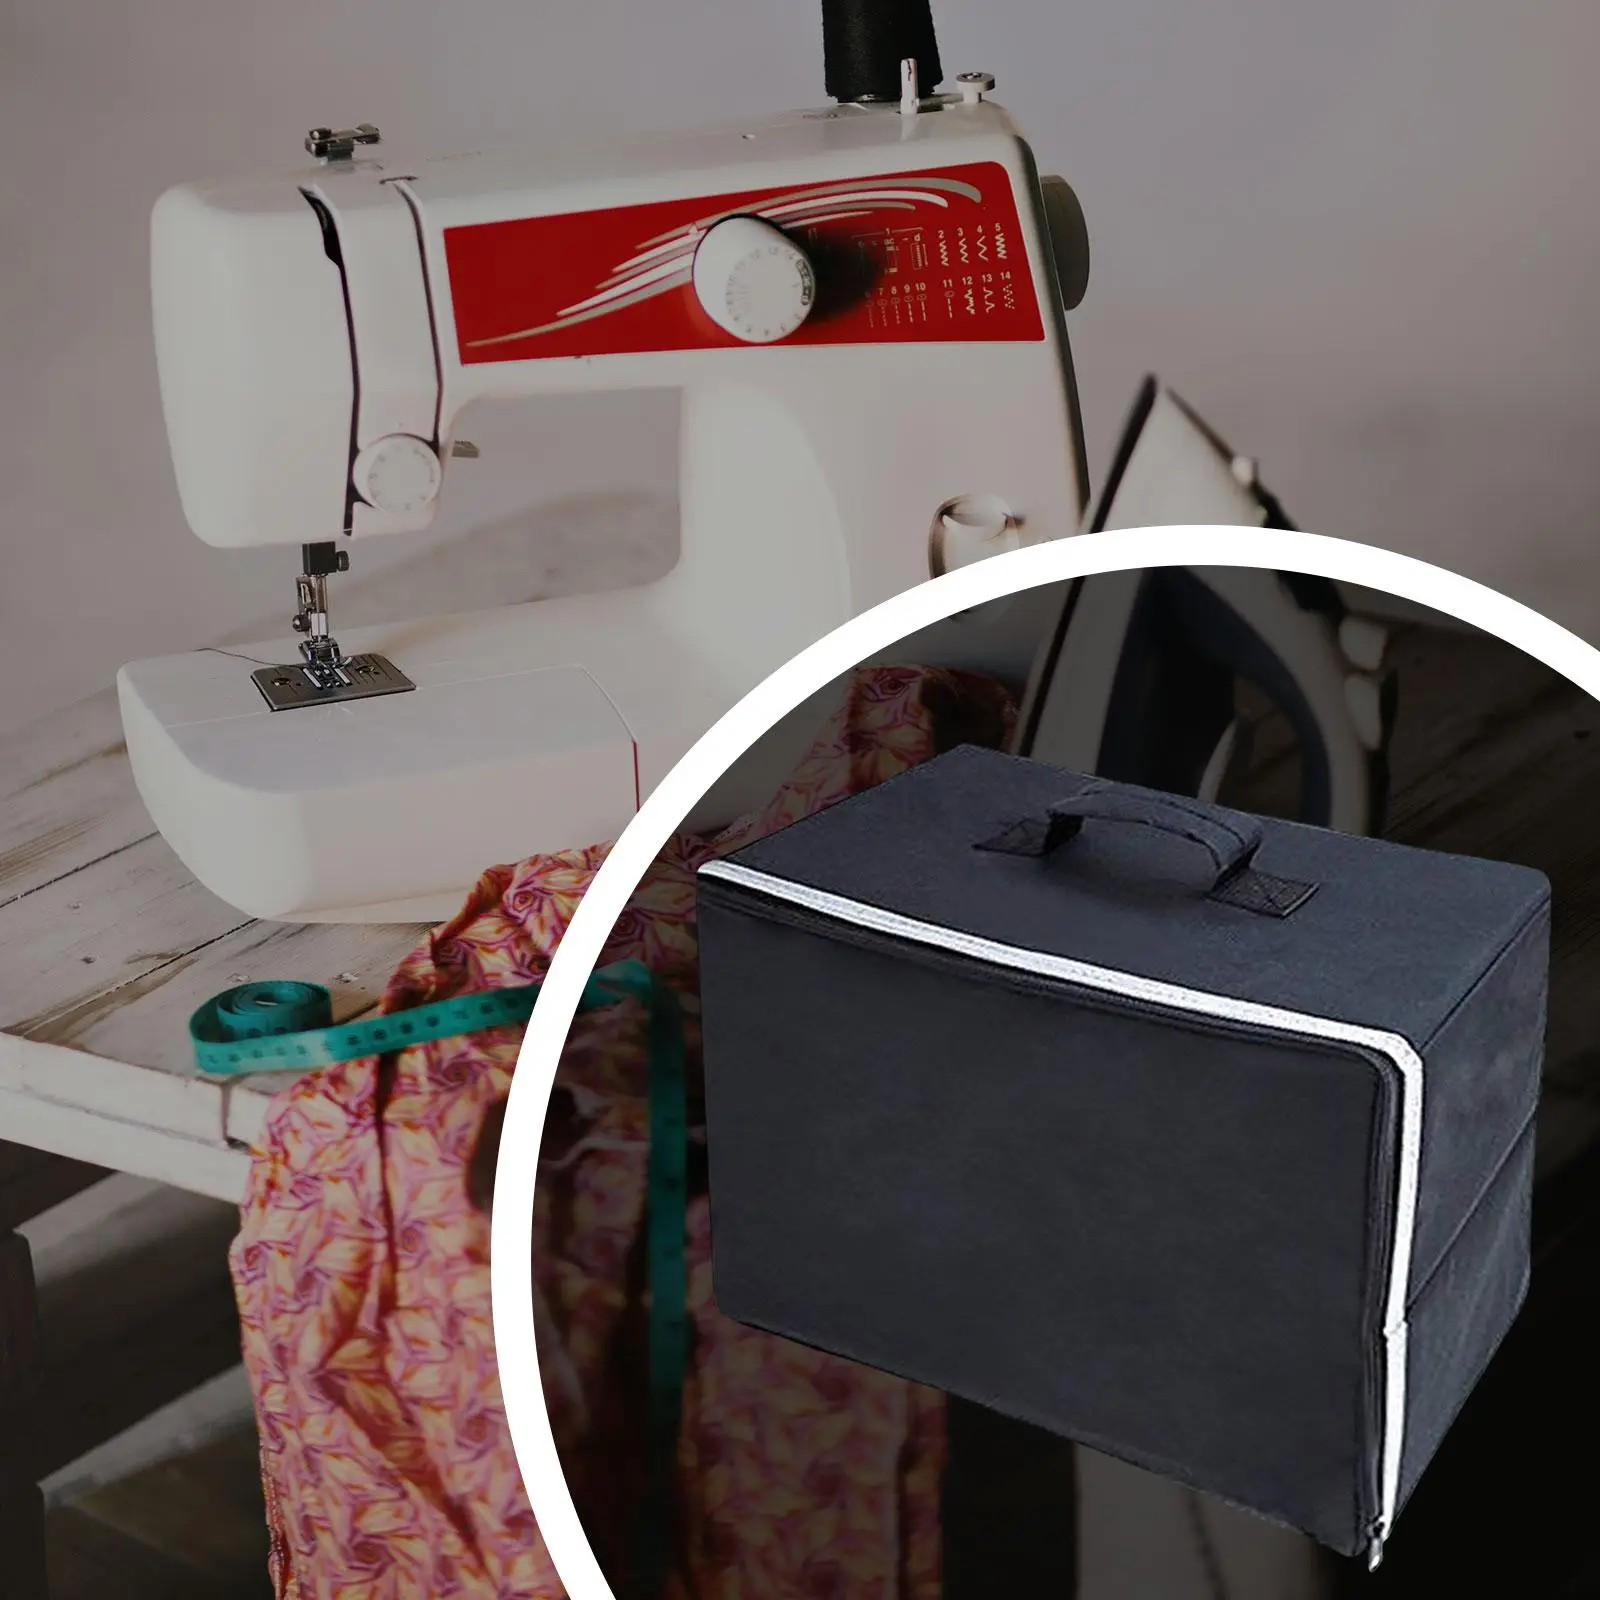 Sewing Machine Carrying Case Sewing Machine Dust Cover Fits Most Standard